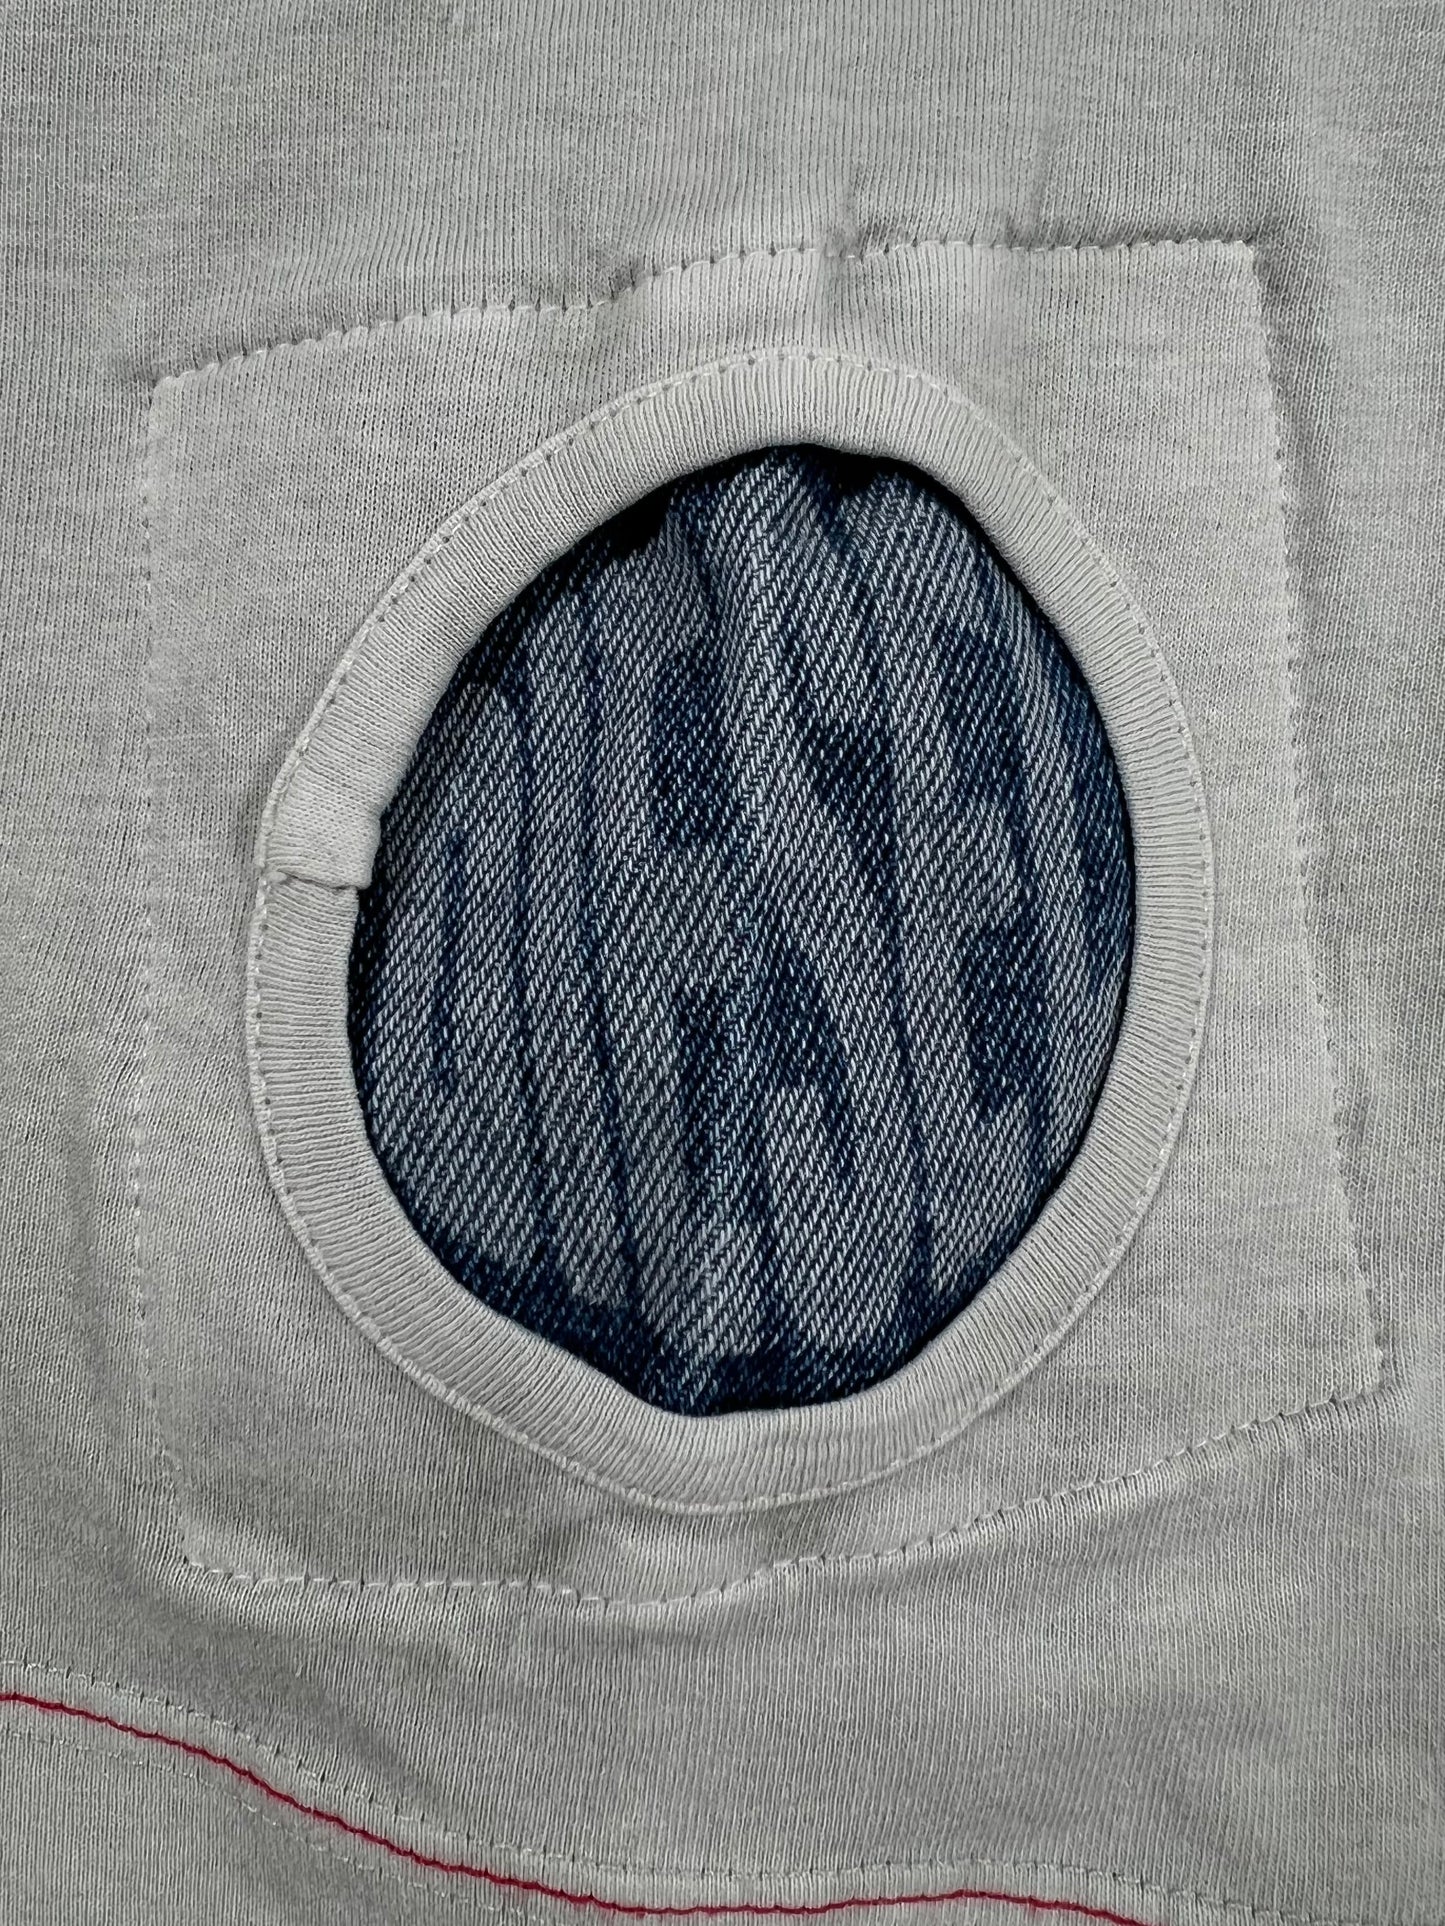 A grey pocket with the word DIESEL T-JUST-LOCK T-SHIRT PALE/GREY on it.